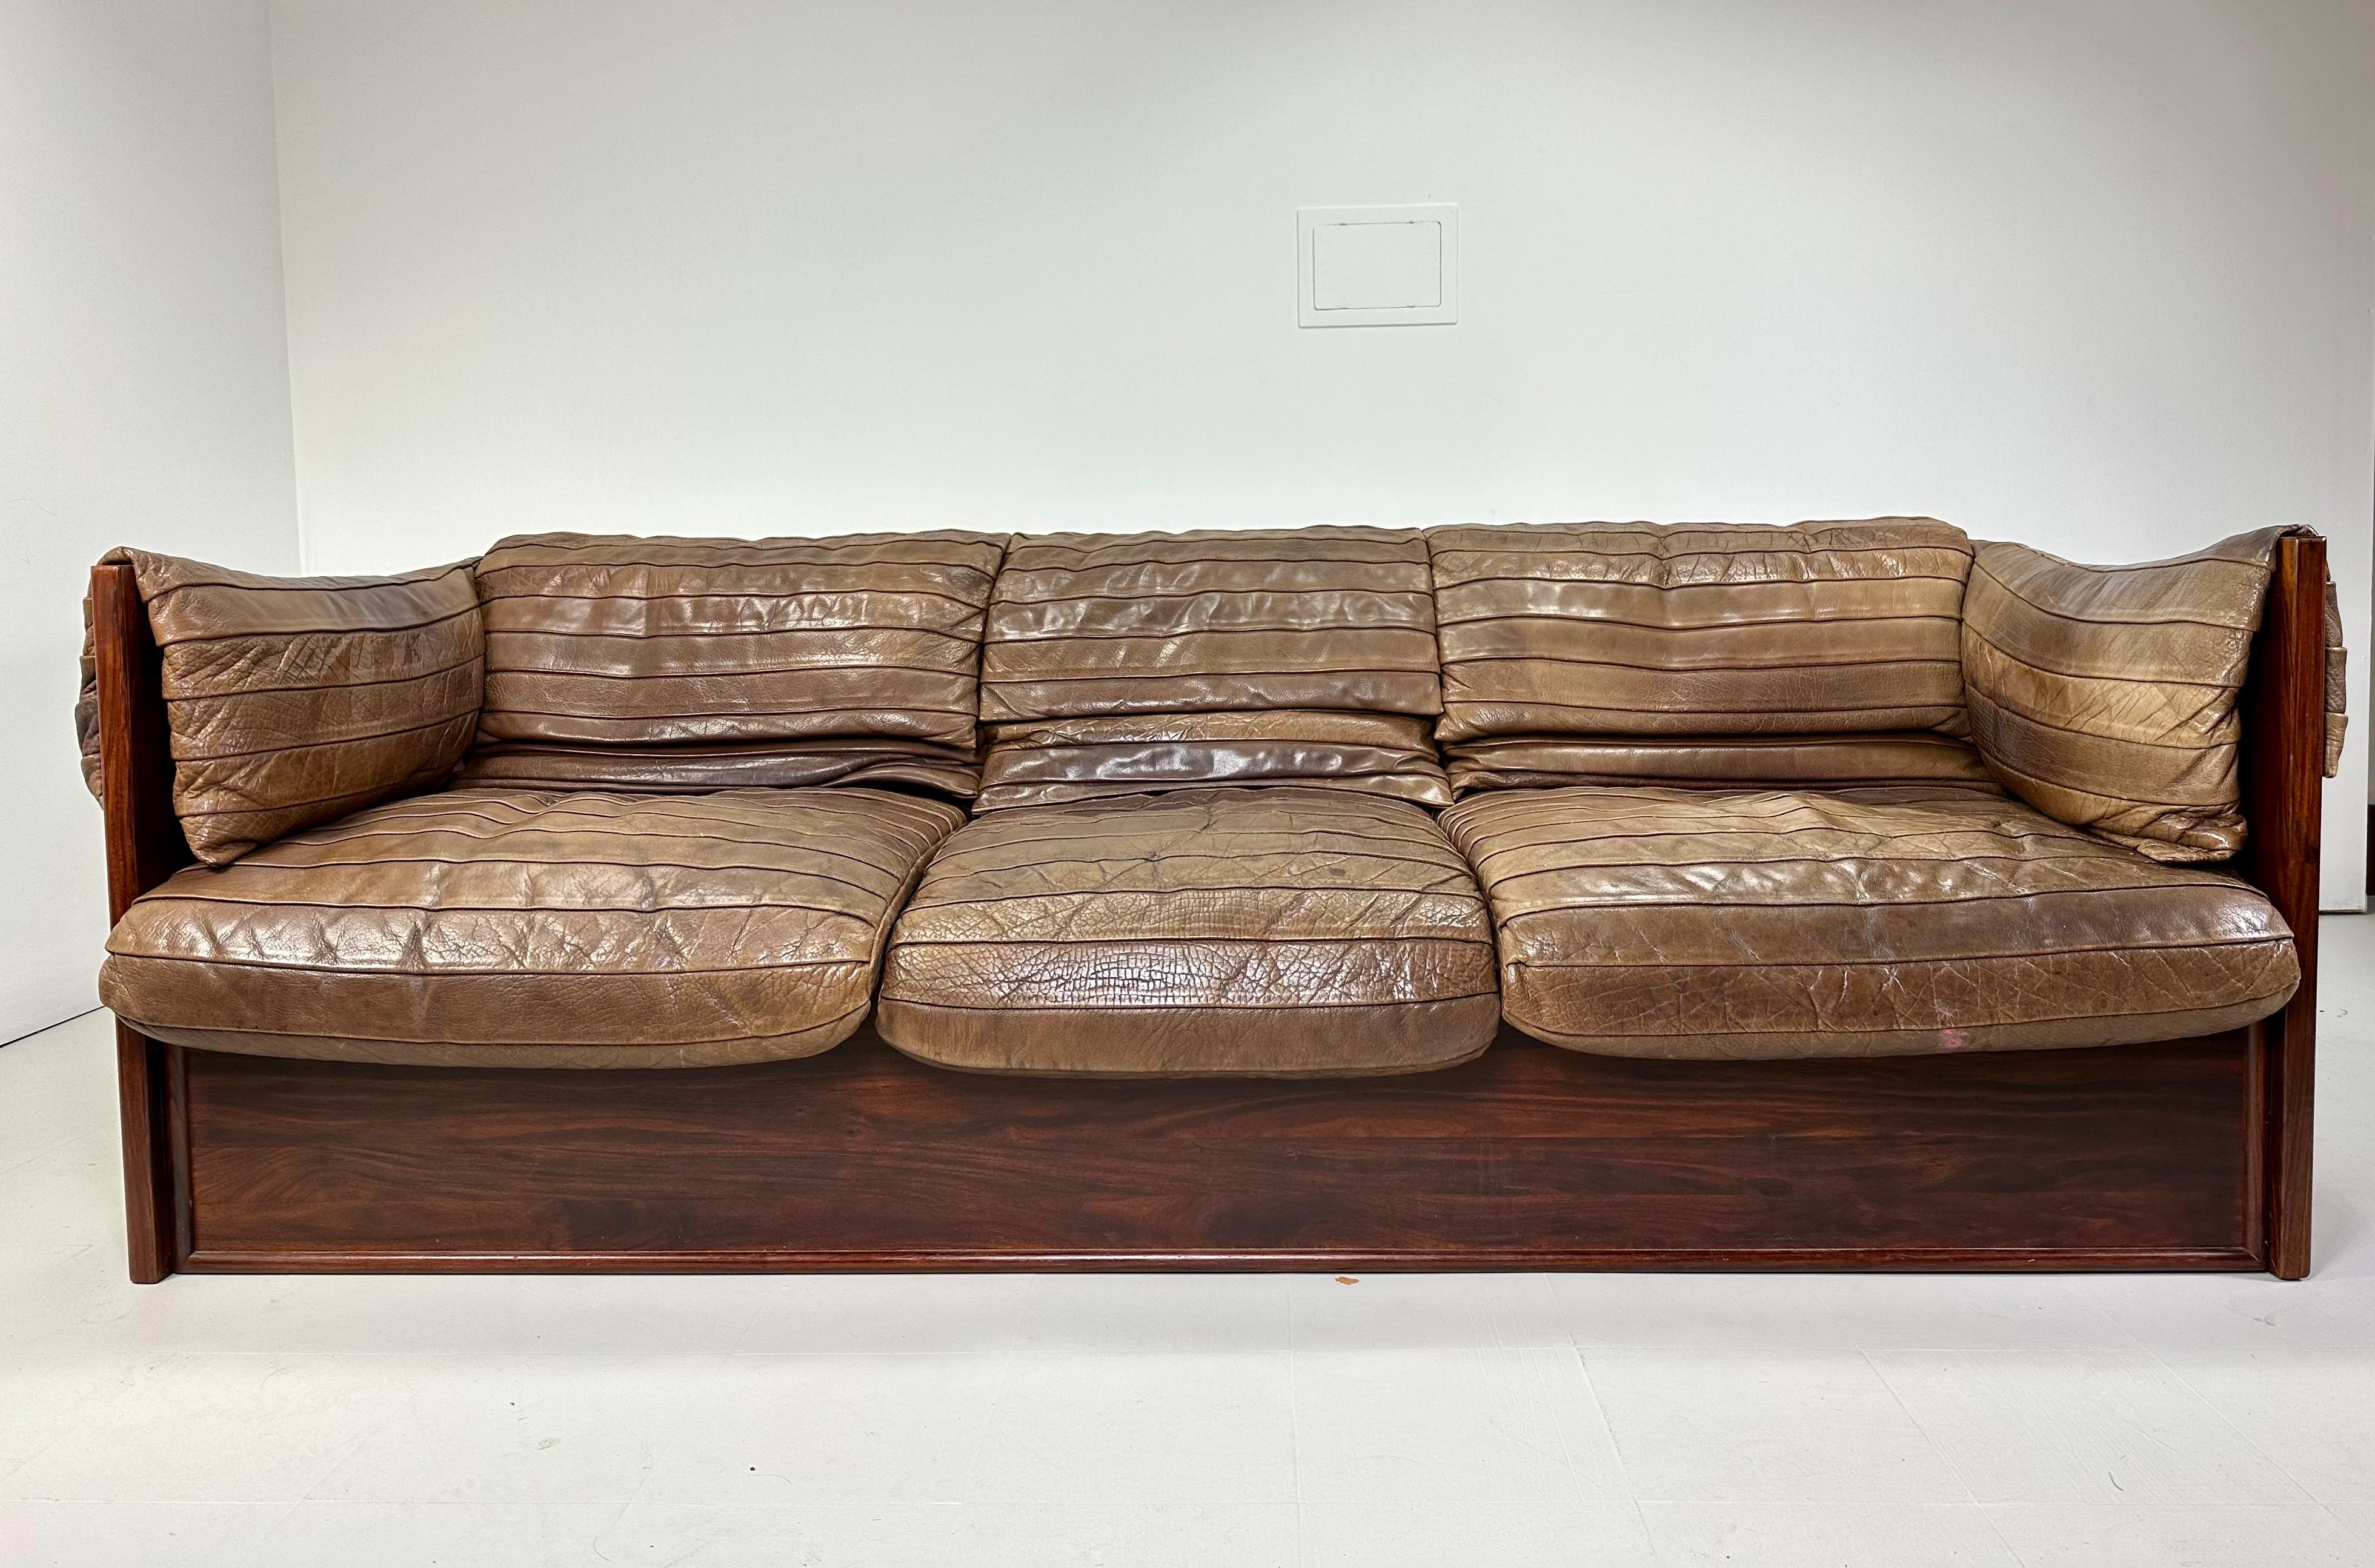 Skipper Mobler Rosewood Box sofa with high quality Buffalo leather. Unique cushion designs creates a wonderful design and excellent comfort. Settee also available. Denmark, 1970’s

Delivery To Nyc Available for $600